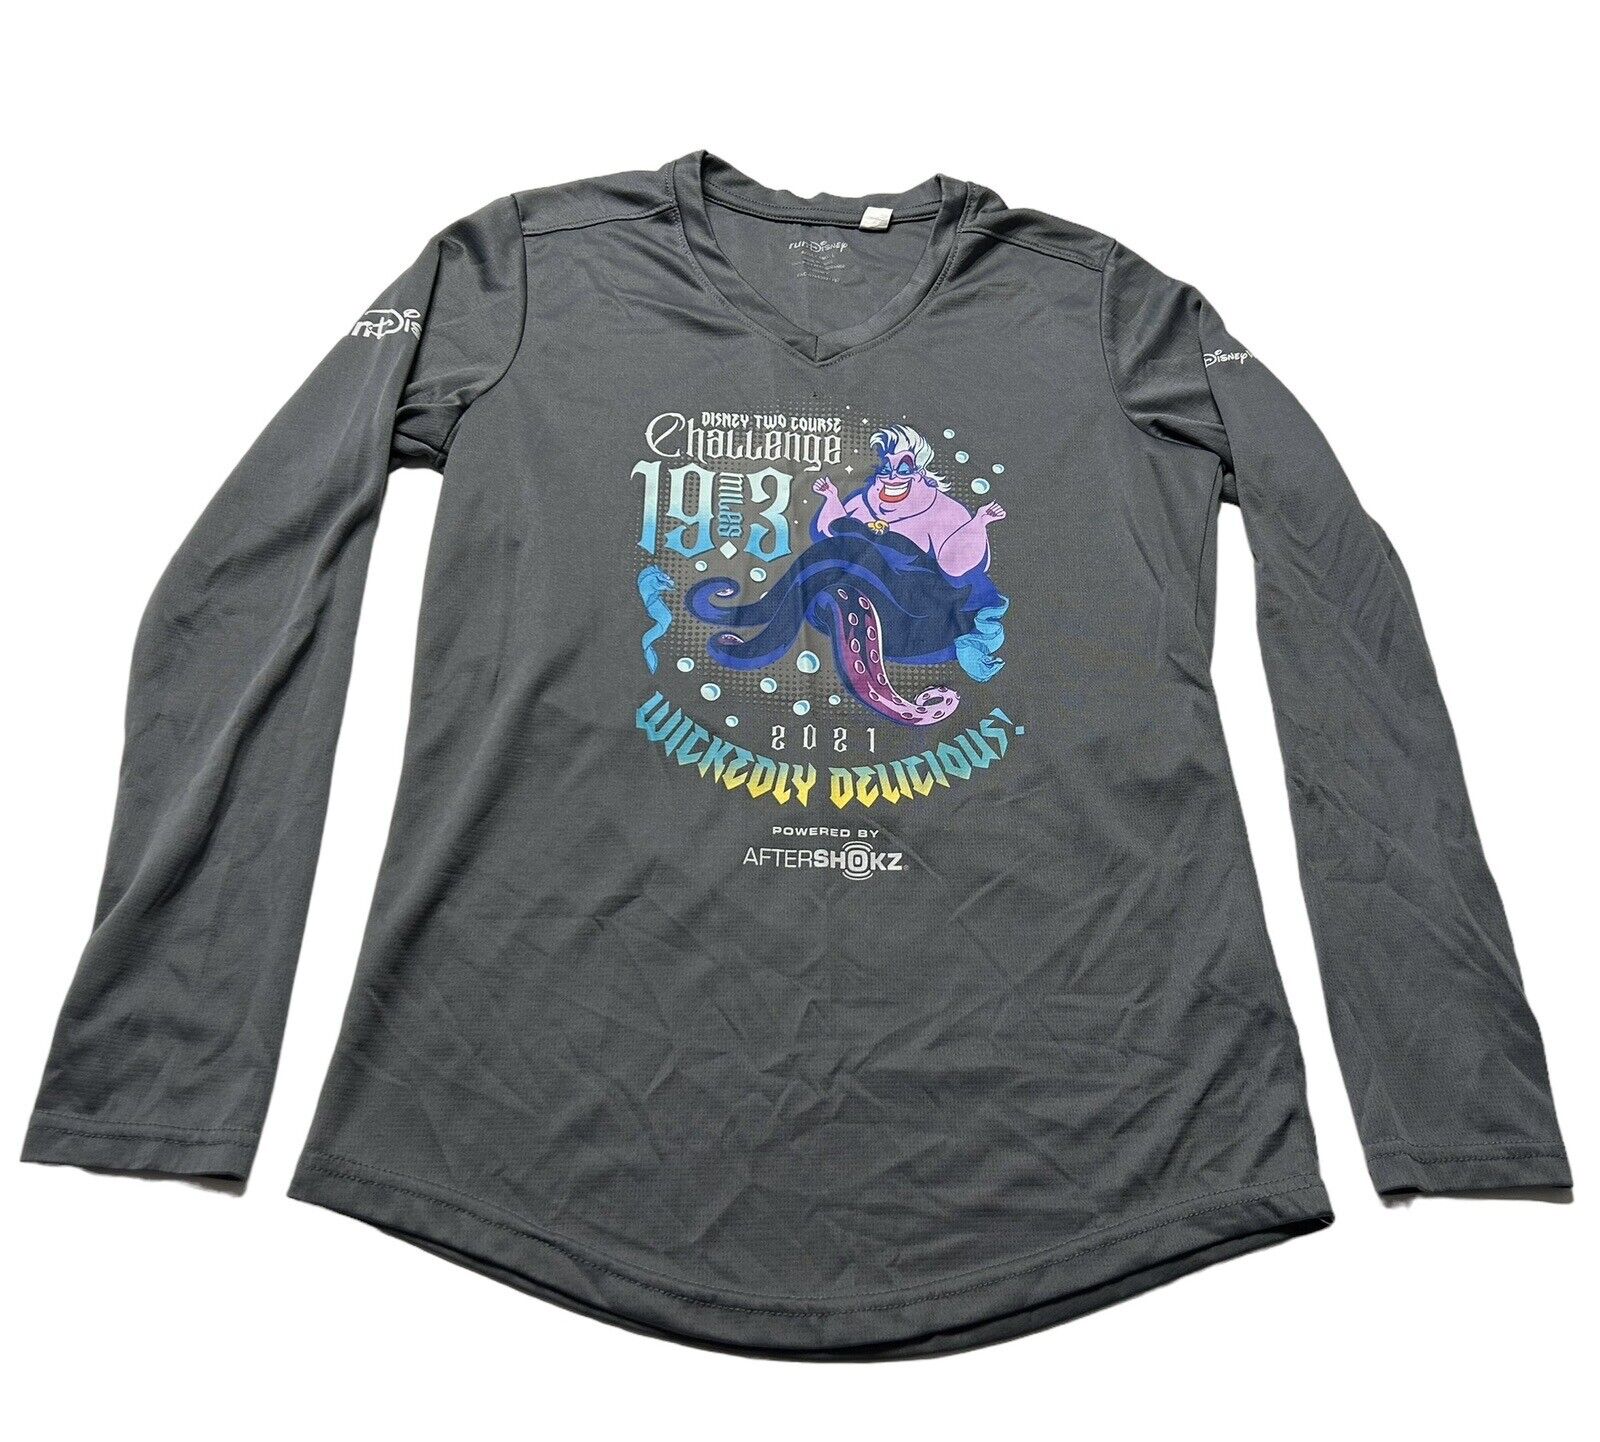 RunDisney 2021 Wine & Dine Two Course Challenge Ursula Race Shirt Woman’s Small